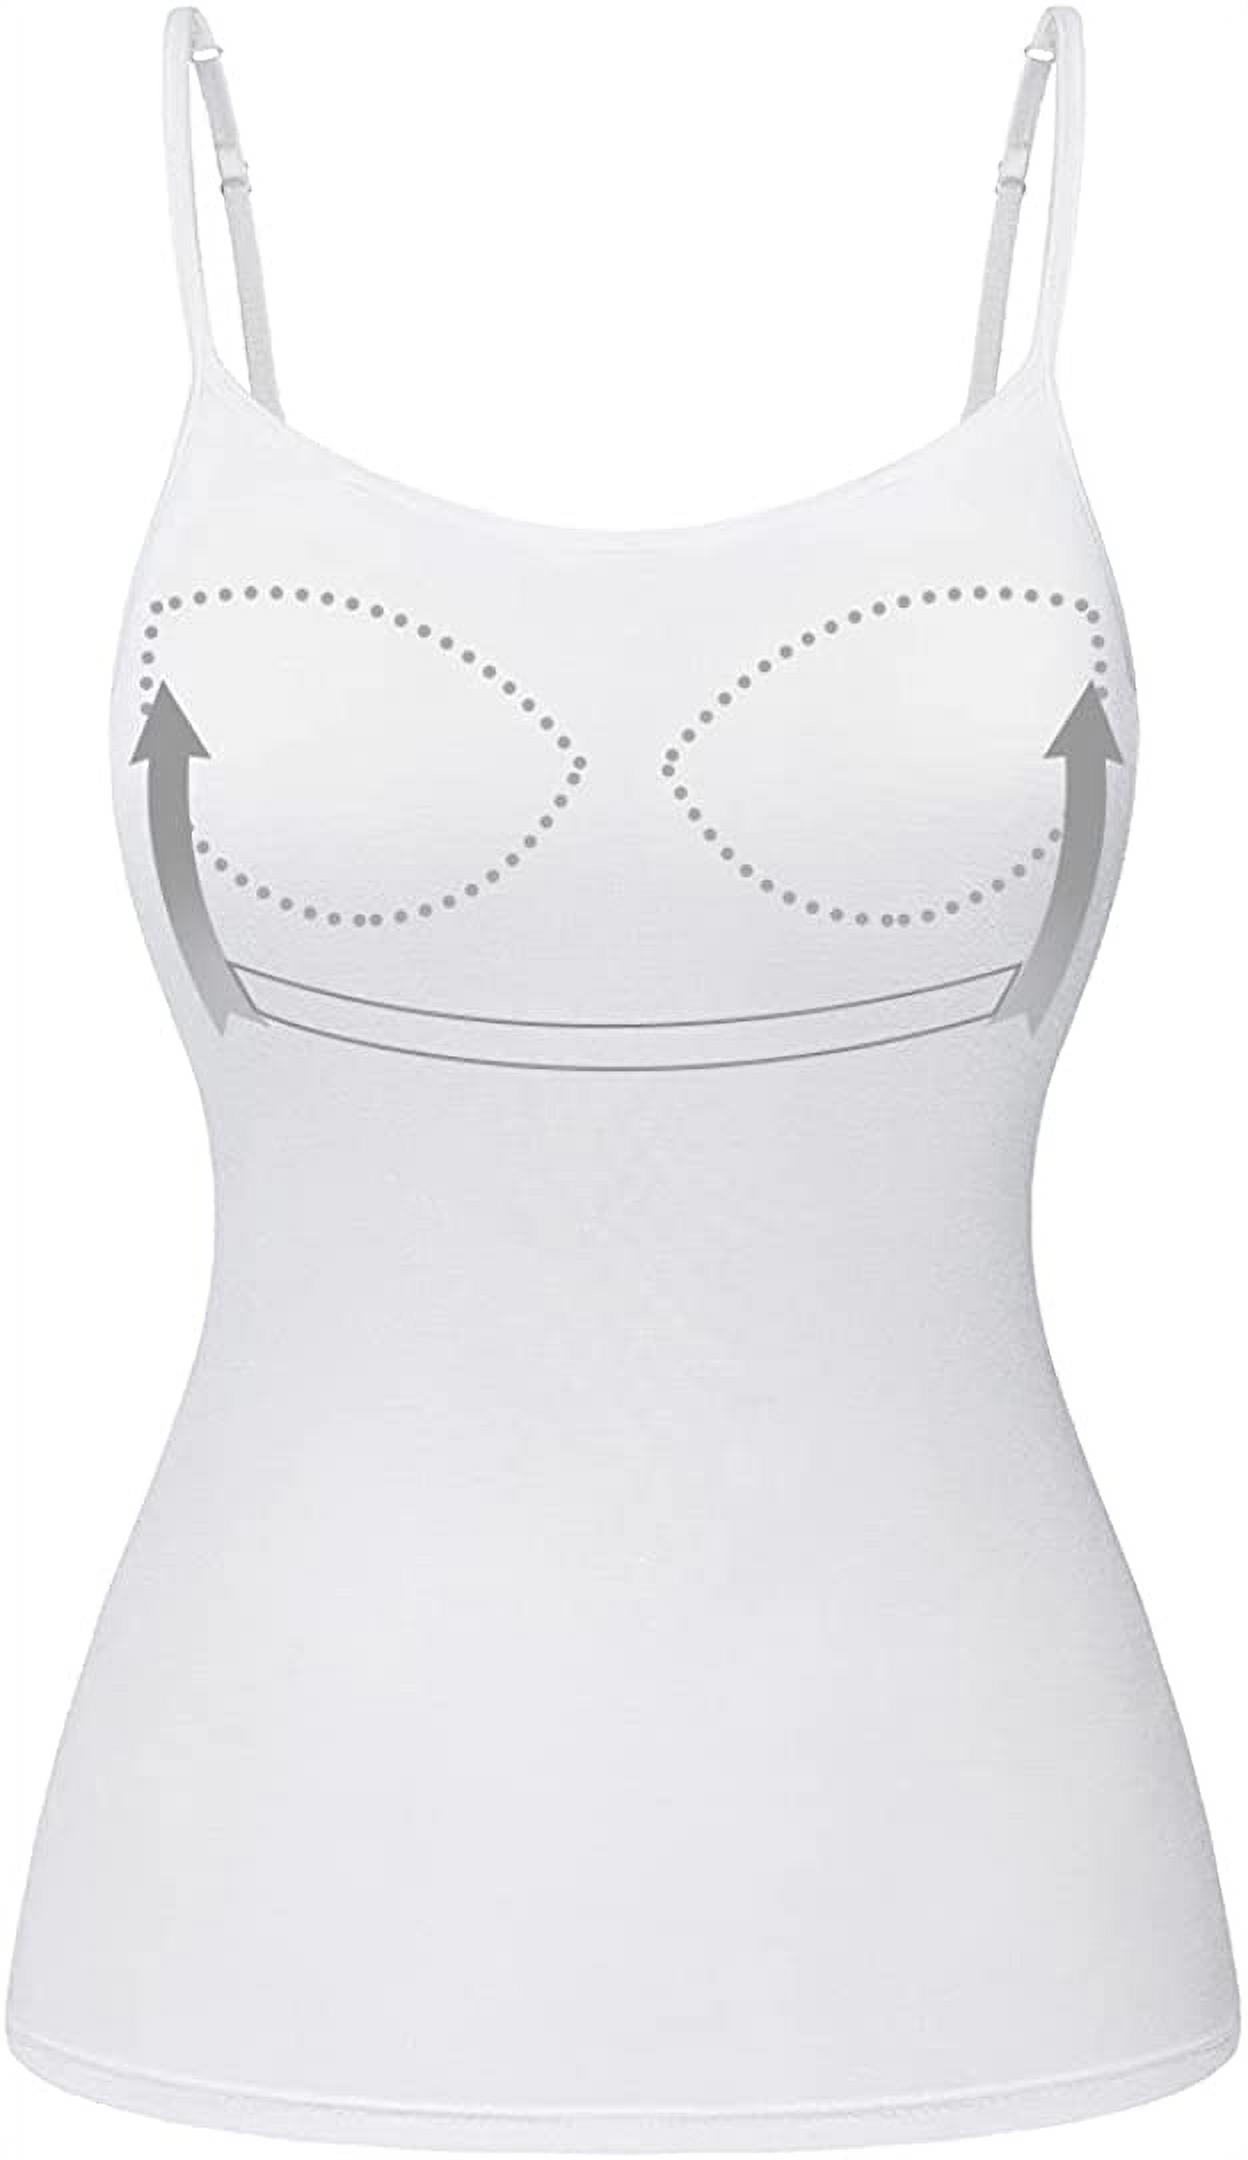 COMFREE Women's Camisole with Built in Padded Bra Adjustable Spaghetti ...